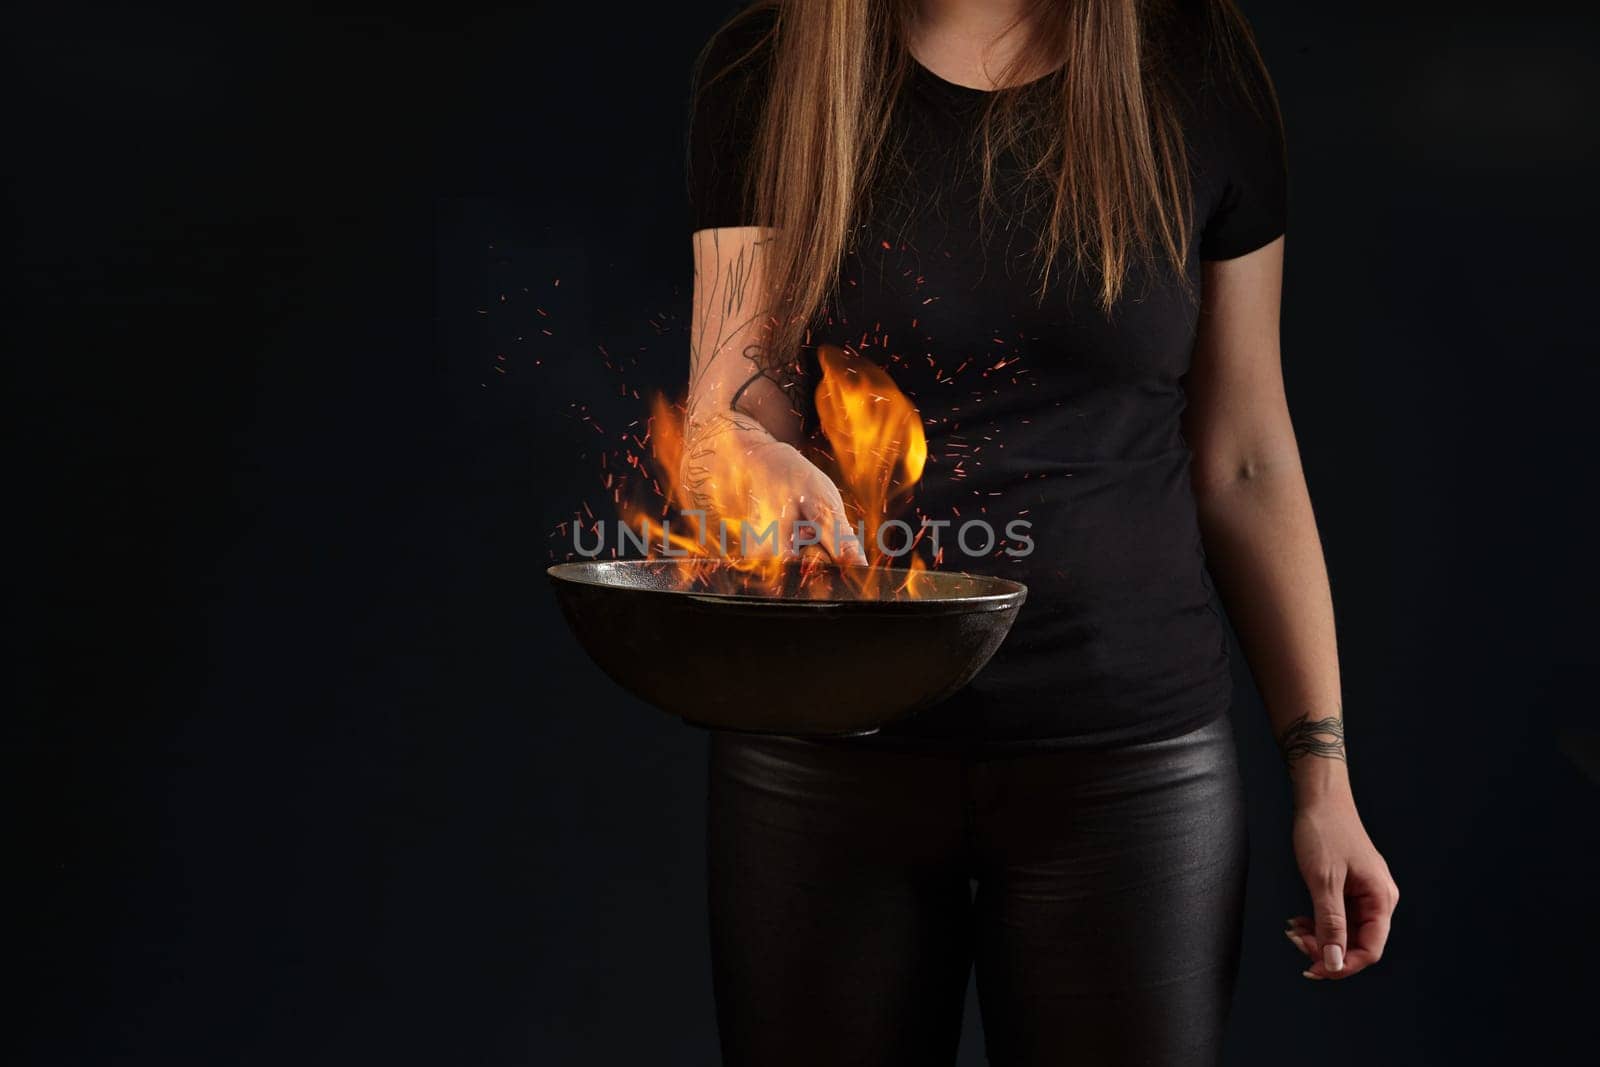 Brunette woman with tattooed hands and long hair, dressed in leather leggings and t-shirt. Holding a wok pan with fire against black studio background. Cooking concept. Close up, copy space